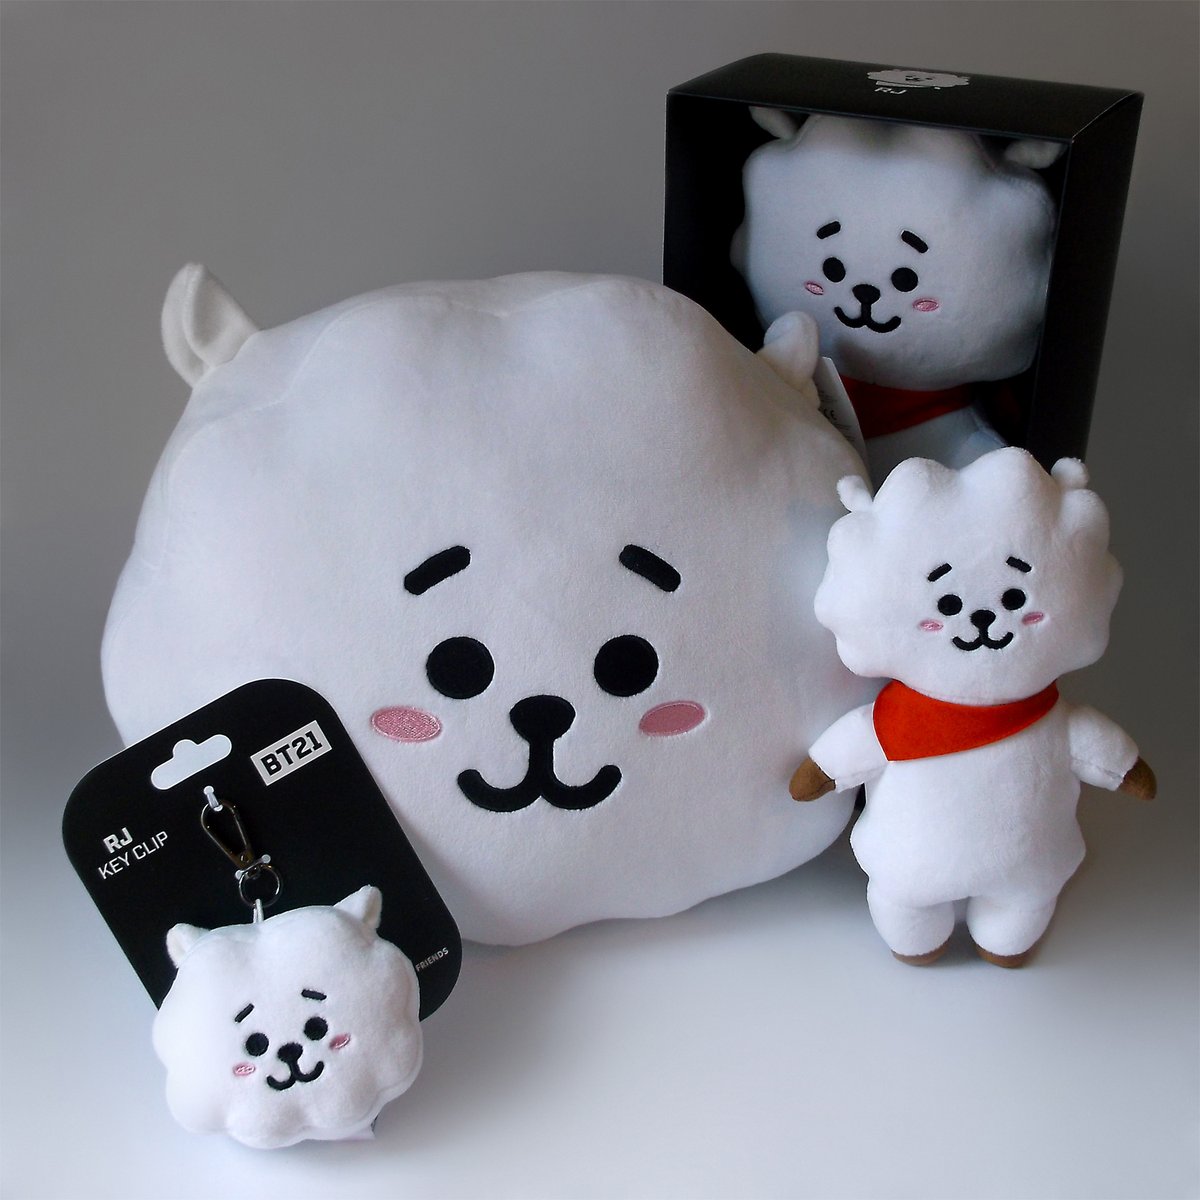 Genki Gear A Restock Of Bt21 Rj Plushies Has Arrived Today These Always Sell Out Crazy Fast Just Warning You Available On Our Website Now T Co 2viazy9wnx All 100 Official Bt21